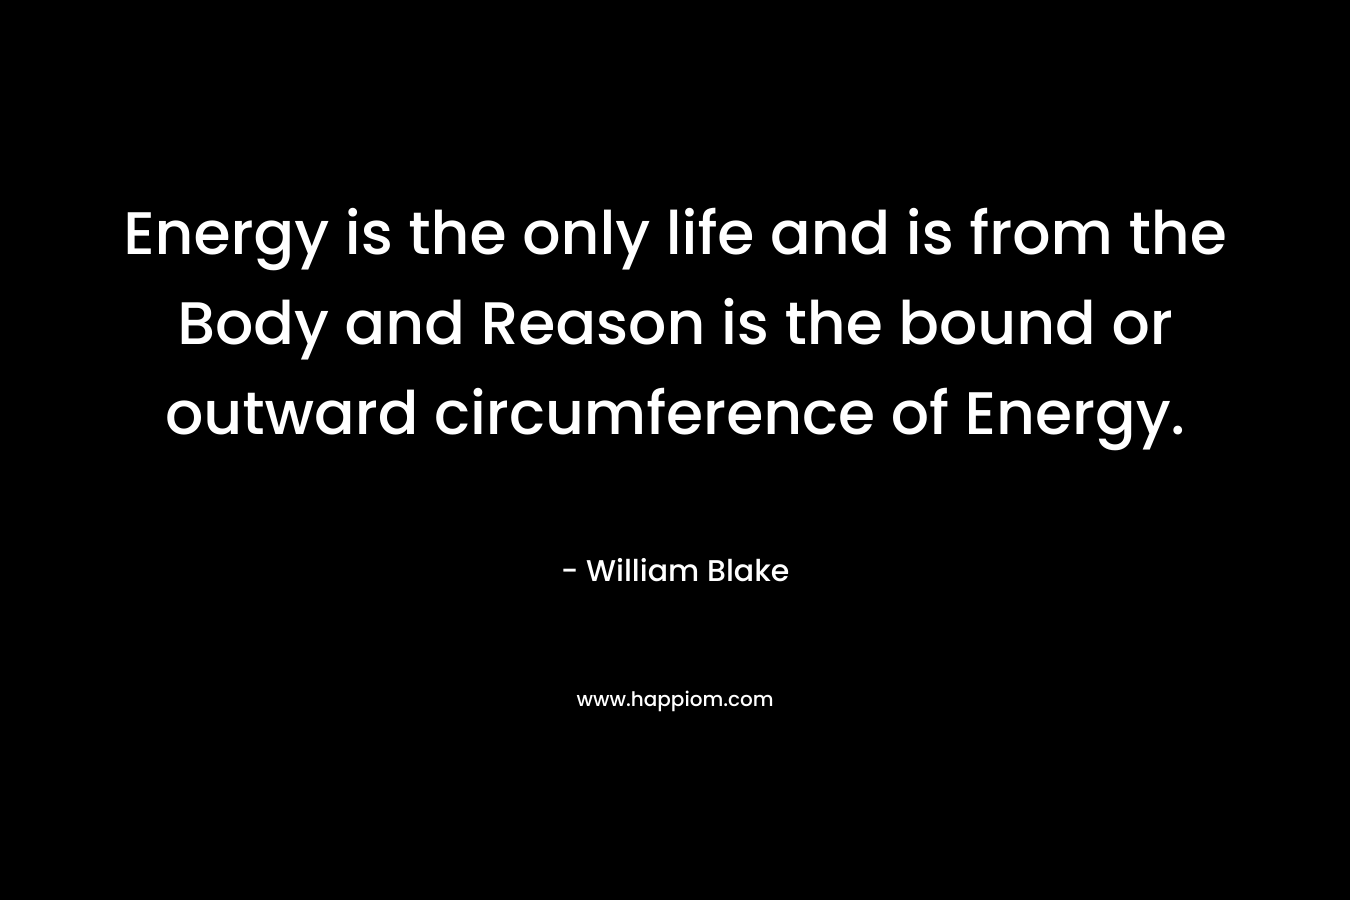 Energy is the only life and is from the Body and Reason is the bound or outward circumference of Energy. – William Blake